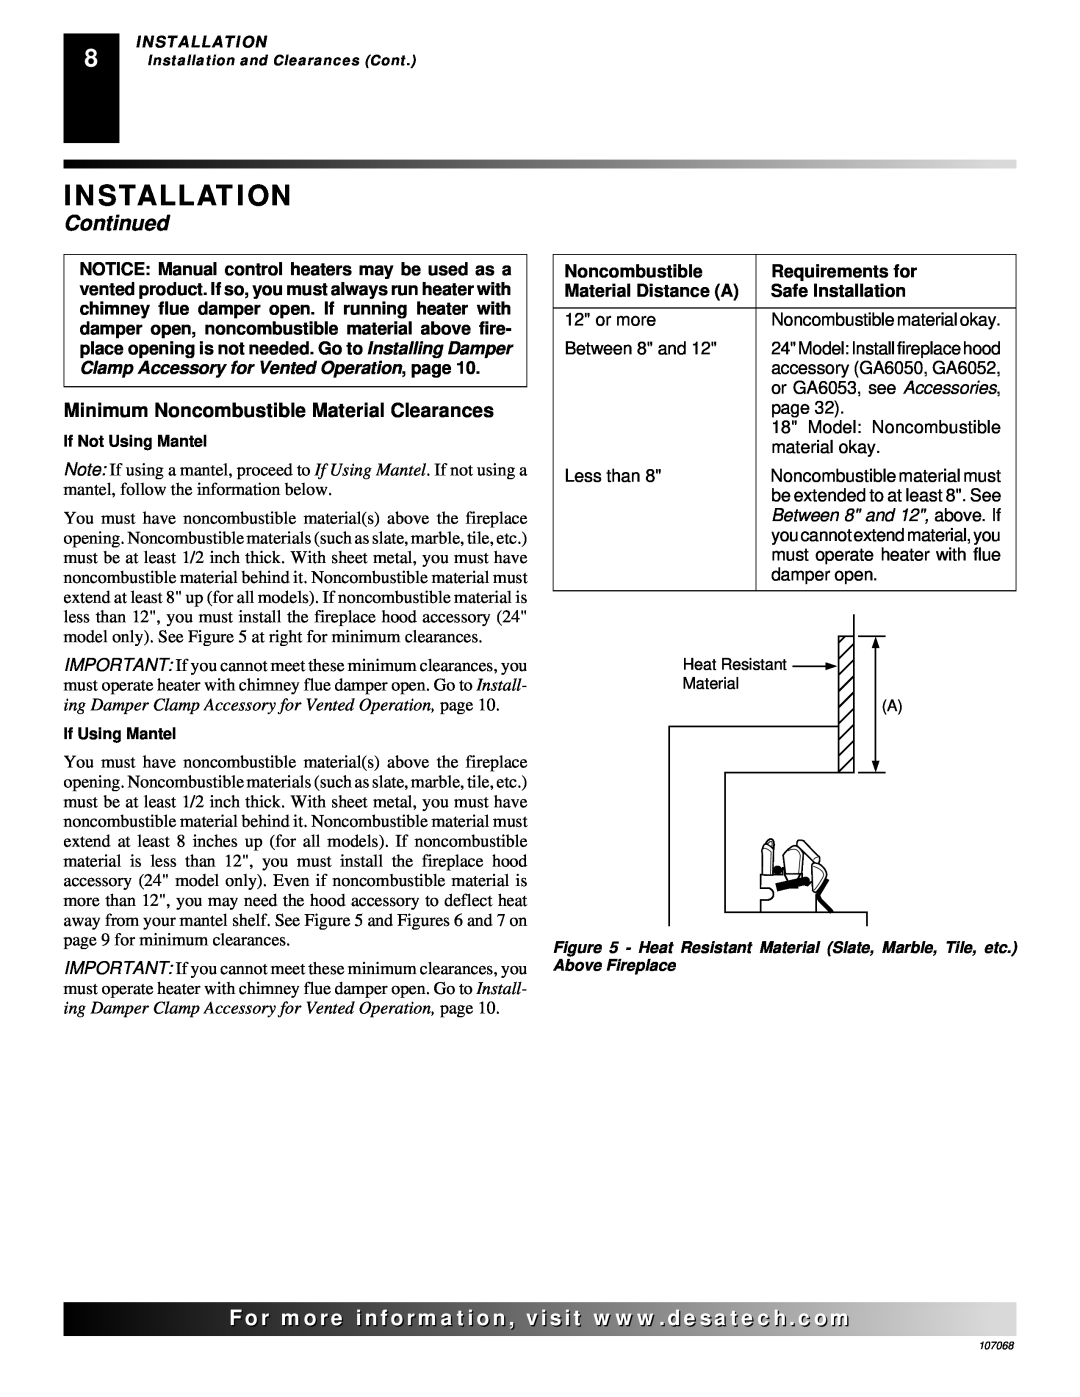 Desa CLD3018NA 24 Continued, Minimum Noncombustible Material Clearances, Requirements for, Safe Installation 